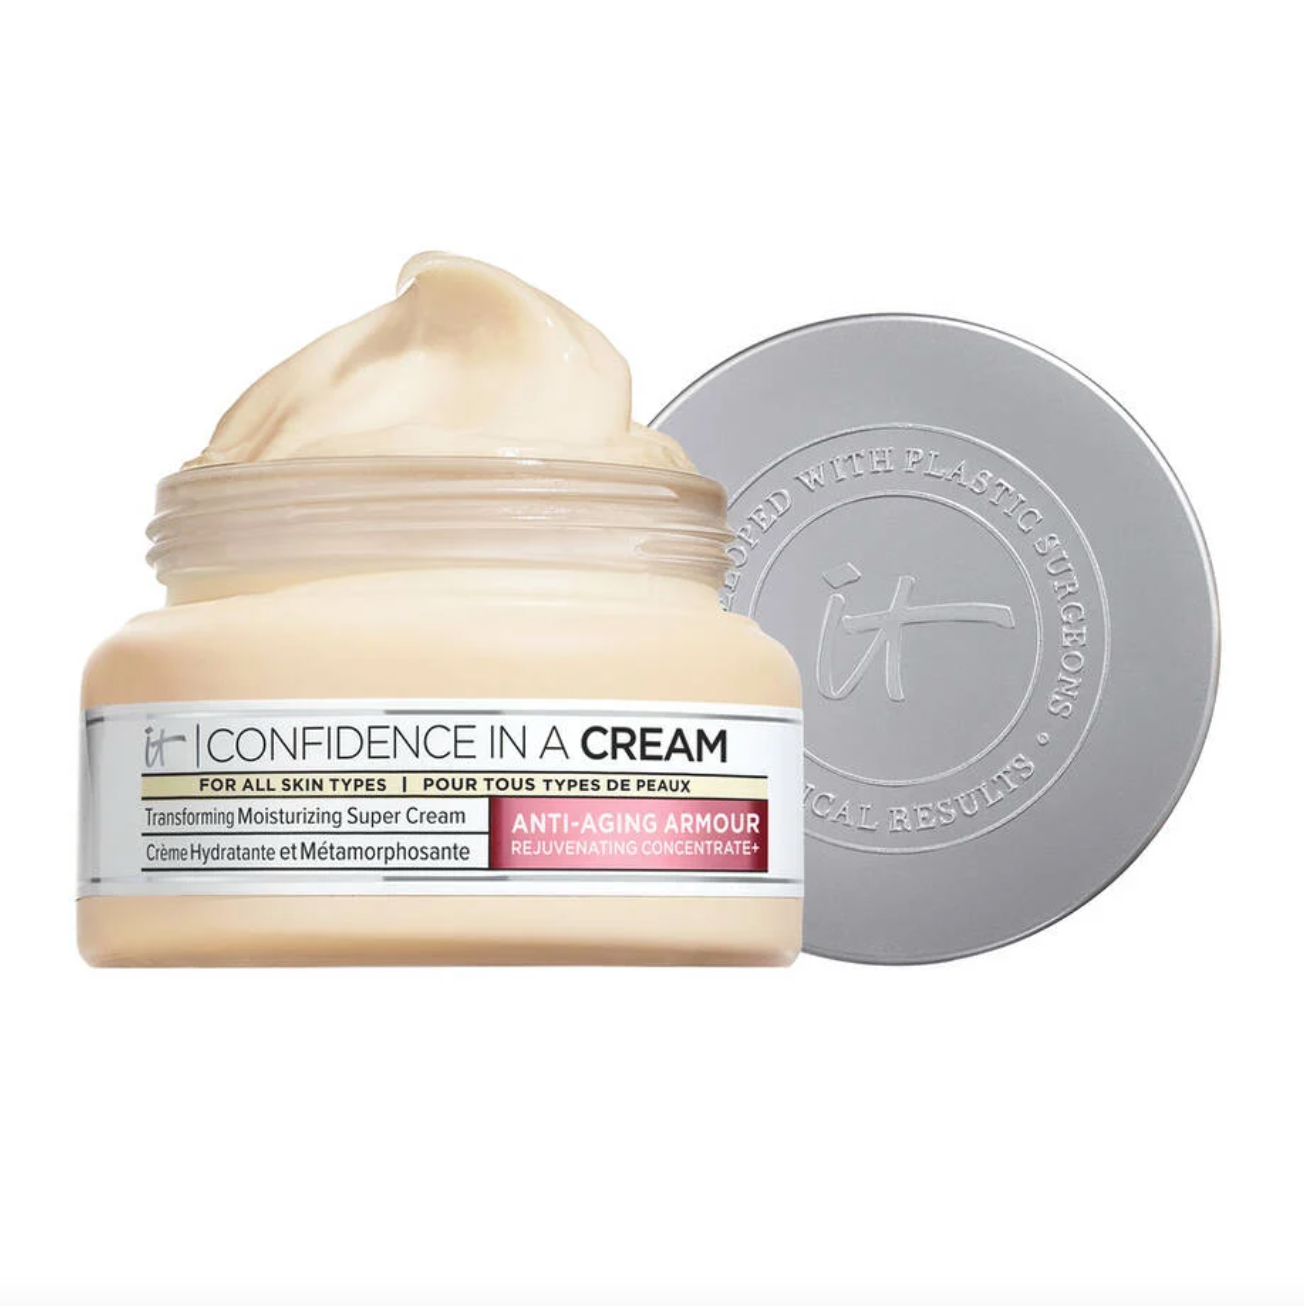 IT Cosmetics Confidence in a Cream Anti-Aging Hydrating Moisturizer